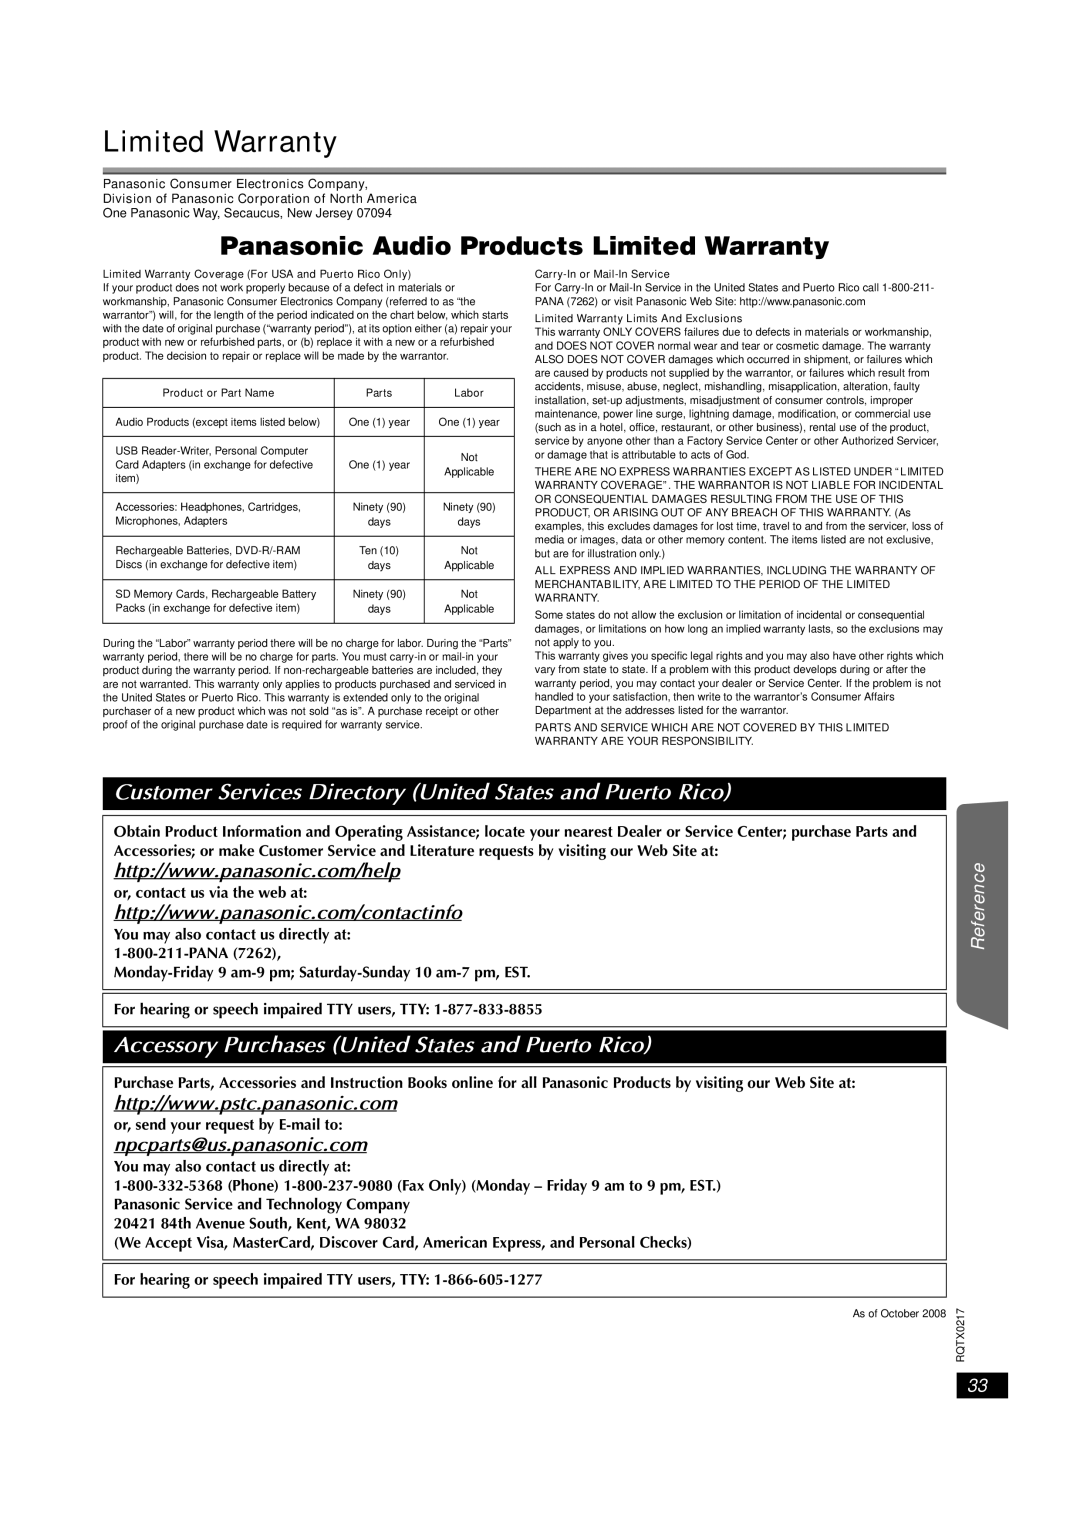 Panasonic SC-PT464 manual Getting Playing Discs Other Operations, Panasonic Audio Products Limited Warranty, Started 